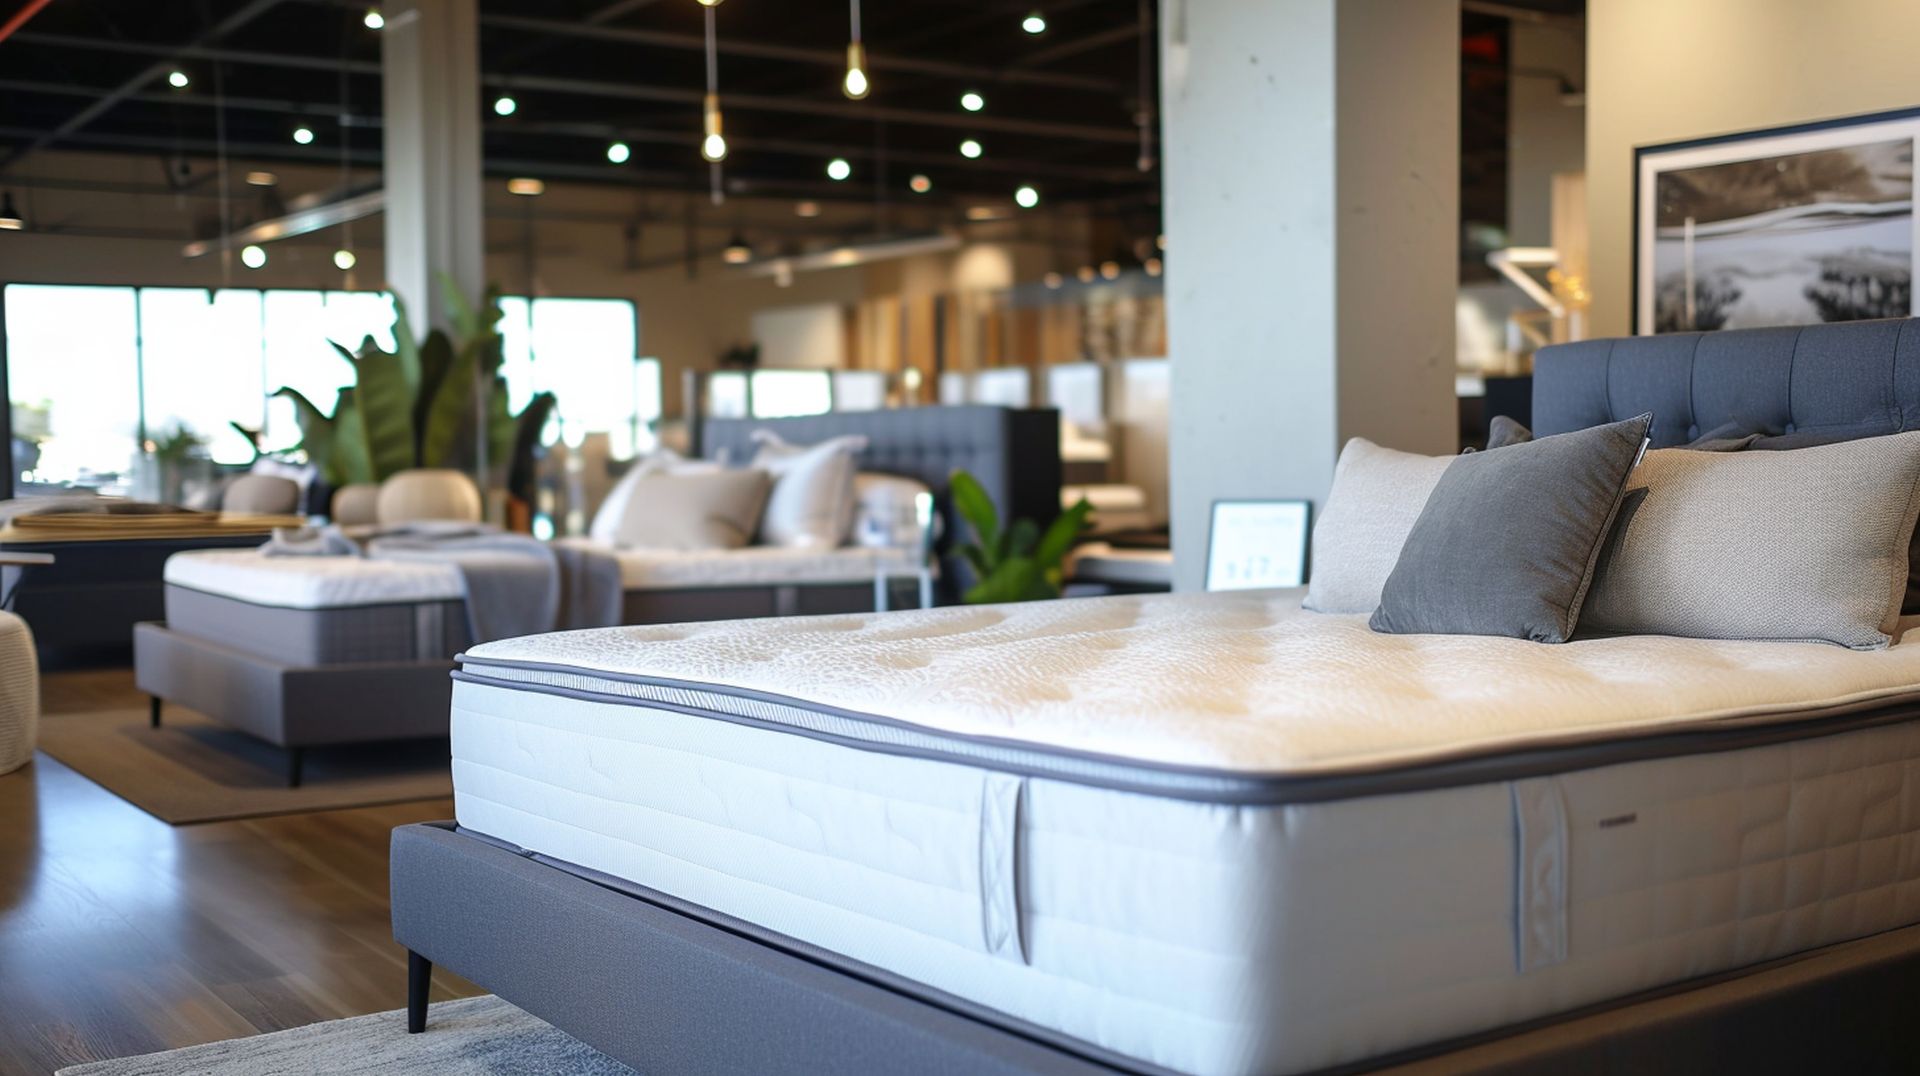 Types of mattresses at mattress dealers in Fayetteville, AR